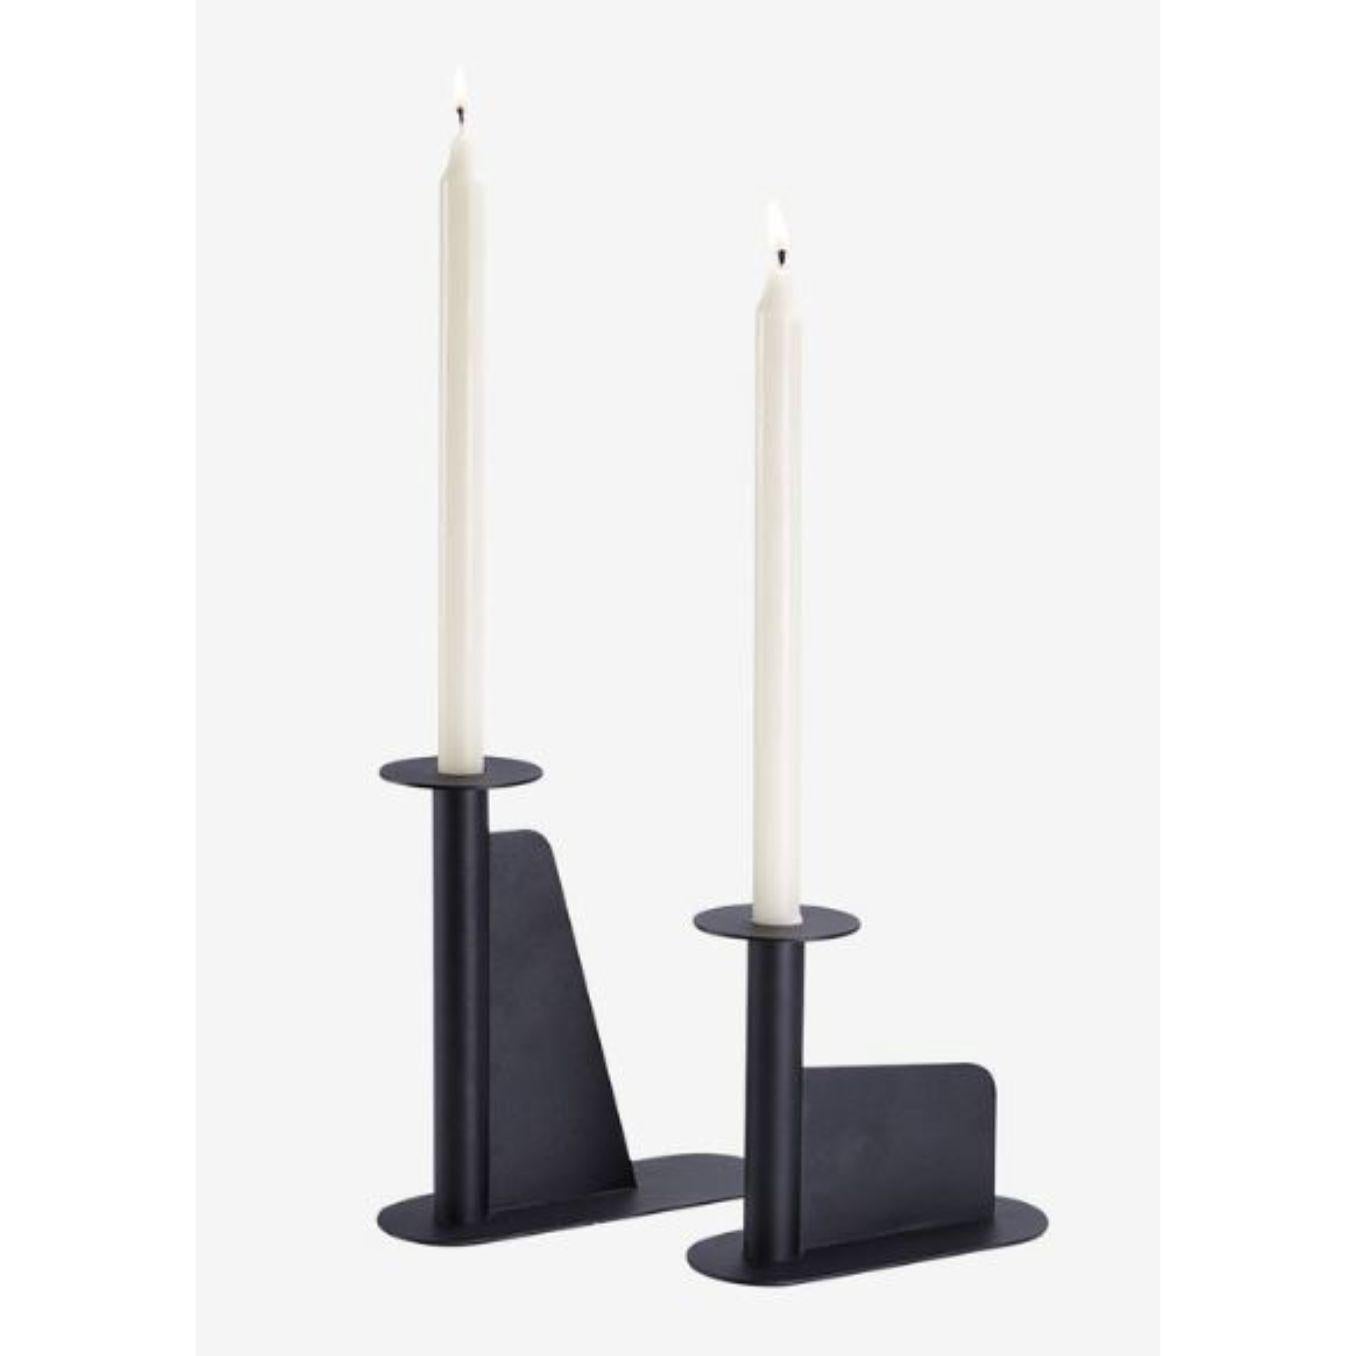 Set of 2 large and small safran candle holder by Radar
Design: Bastien Taillard
Materials: Metal.
Dimensions: D 20 x W 7 x H 18.5 cm / D 18 x W 7 x H 16 cm.

Elegant, timeless, understated. The RADAR collection allows you to take a welcome